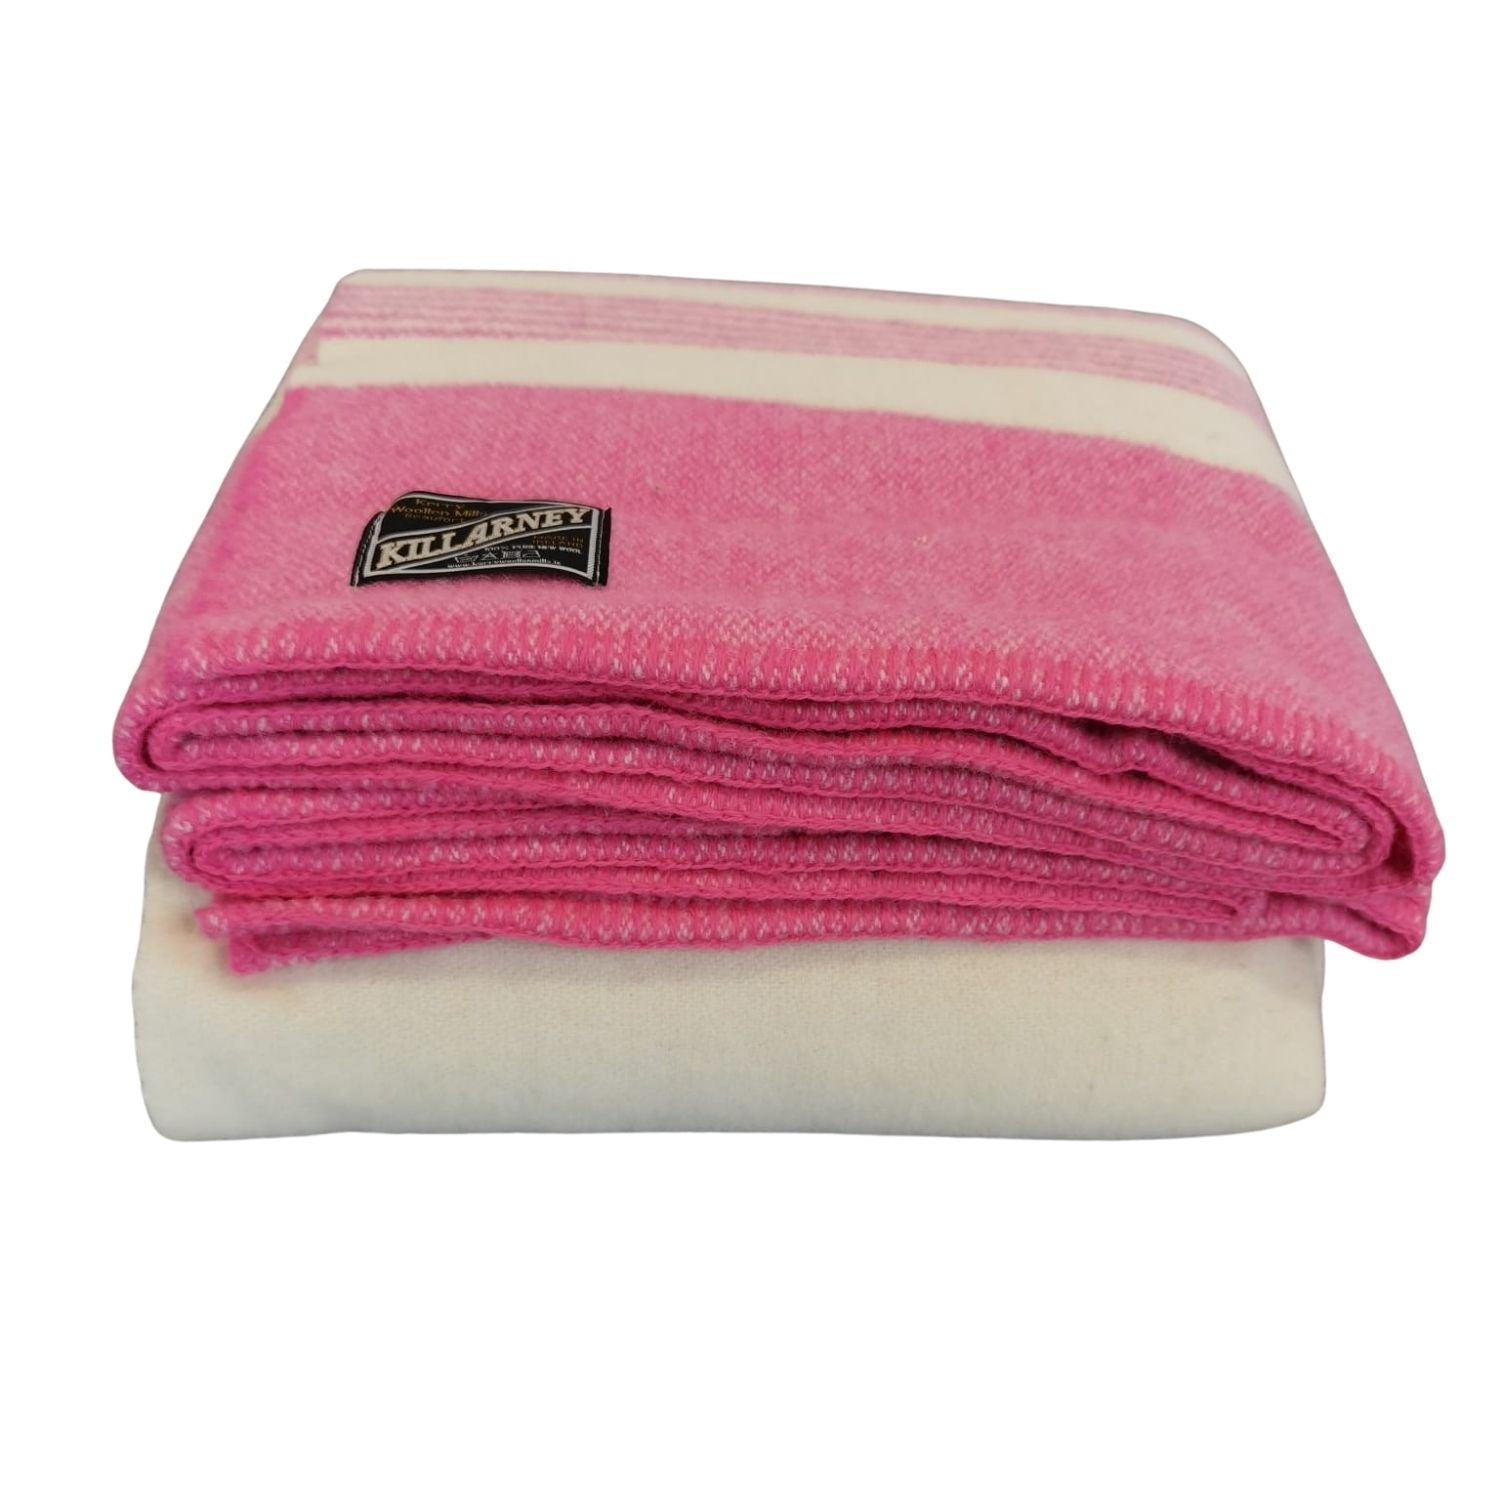 Kerry Woollen Mills 100% Pure Wool Blankets - White &amp; Pink 3 Shaws Department Stores